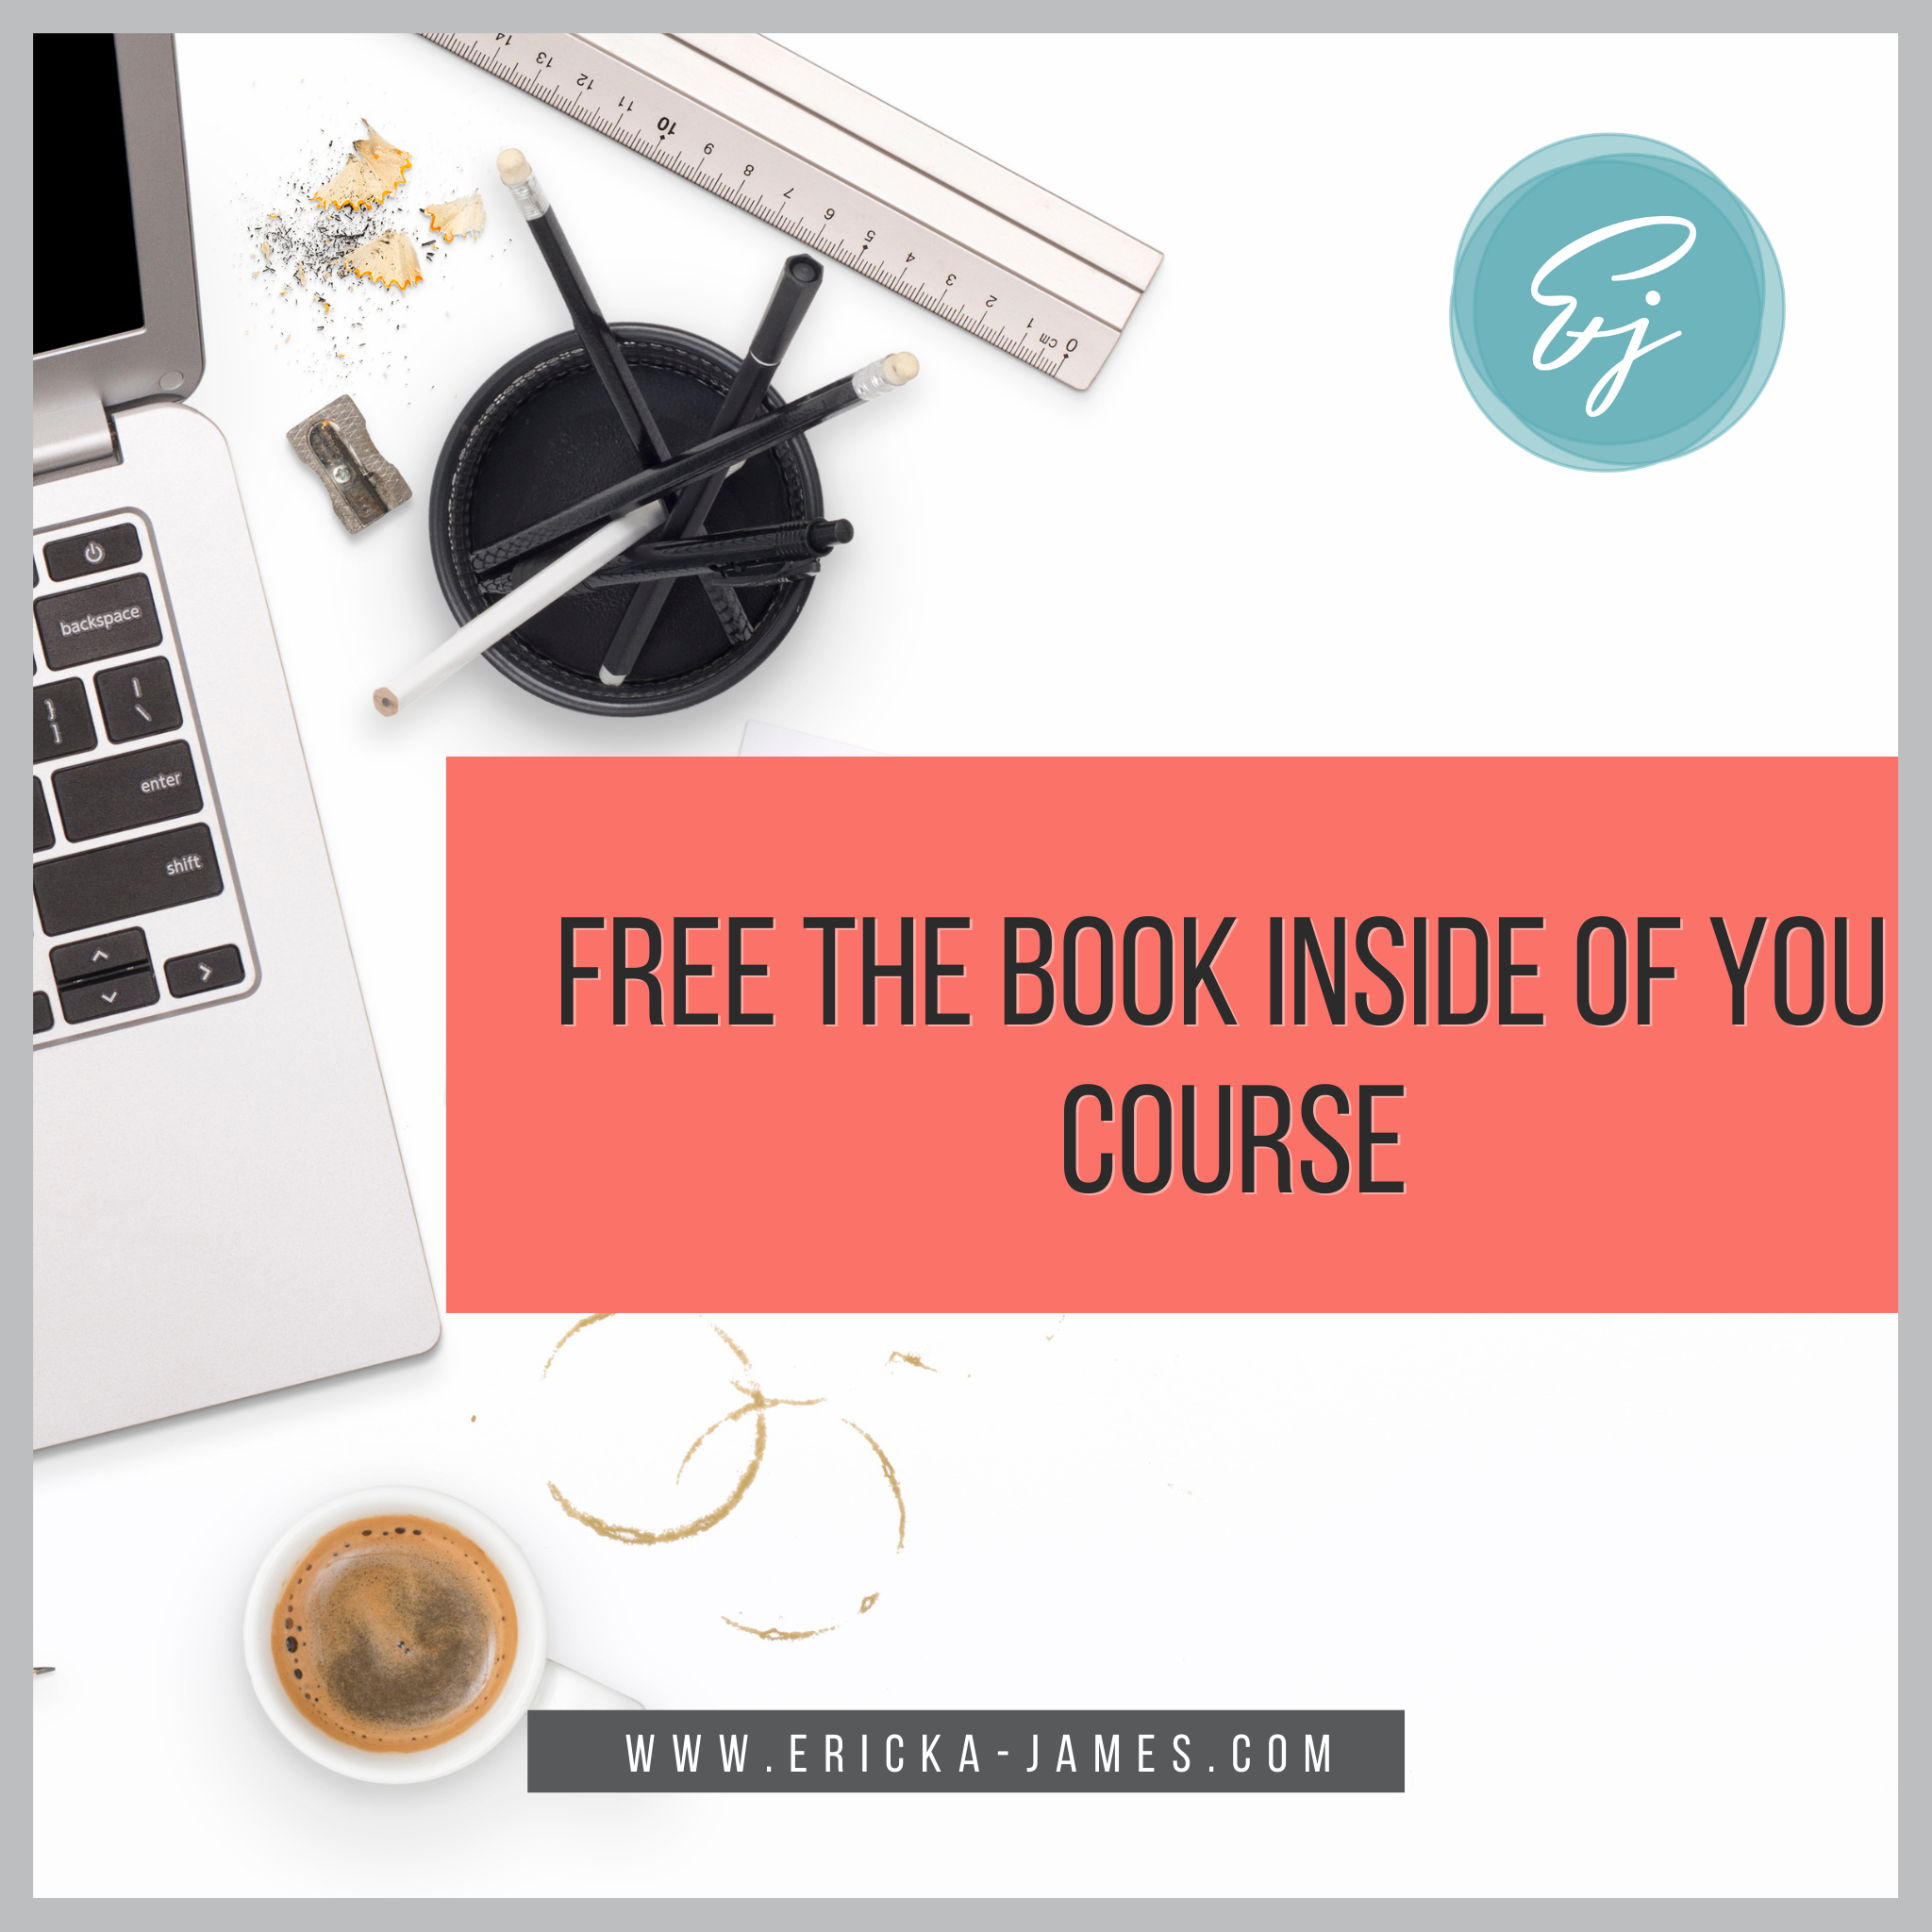 Free the Book Inside of You Course